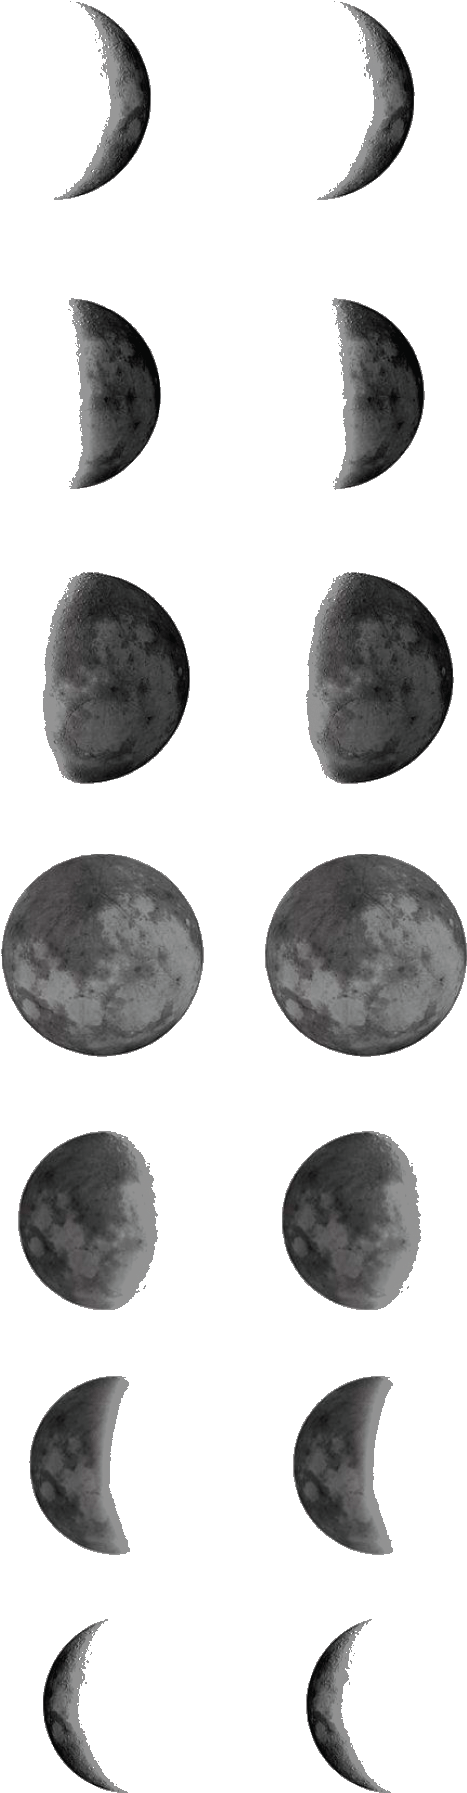 Temporary Tattoo Moon Phases Moon Phase Tattoo Template